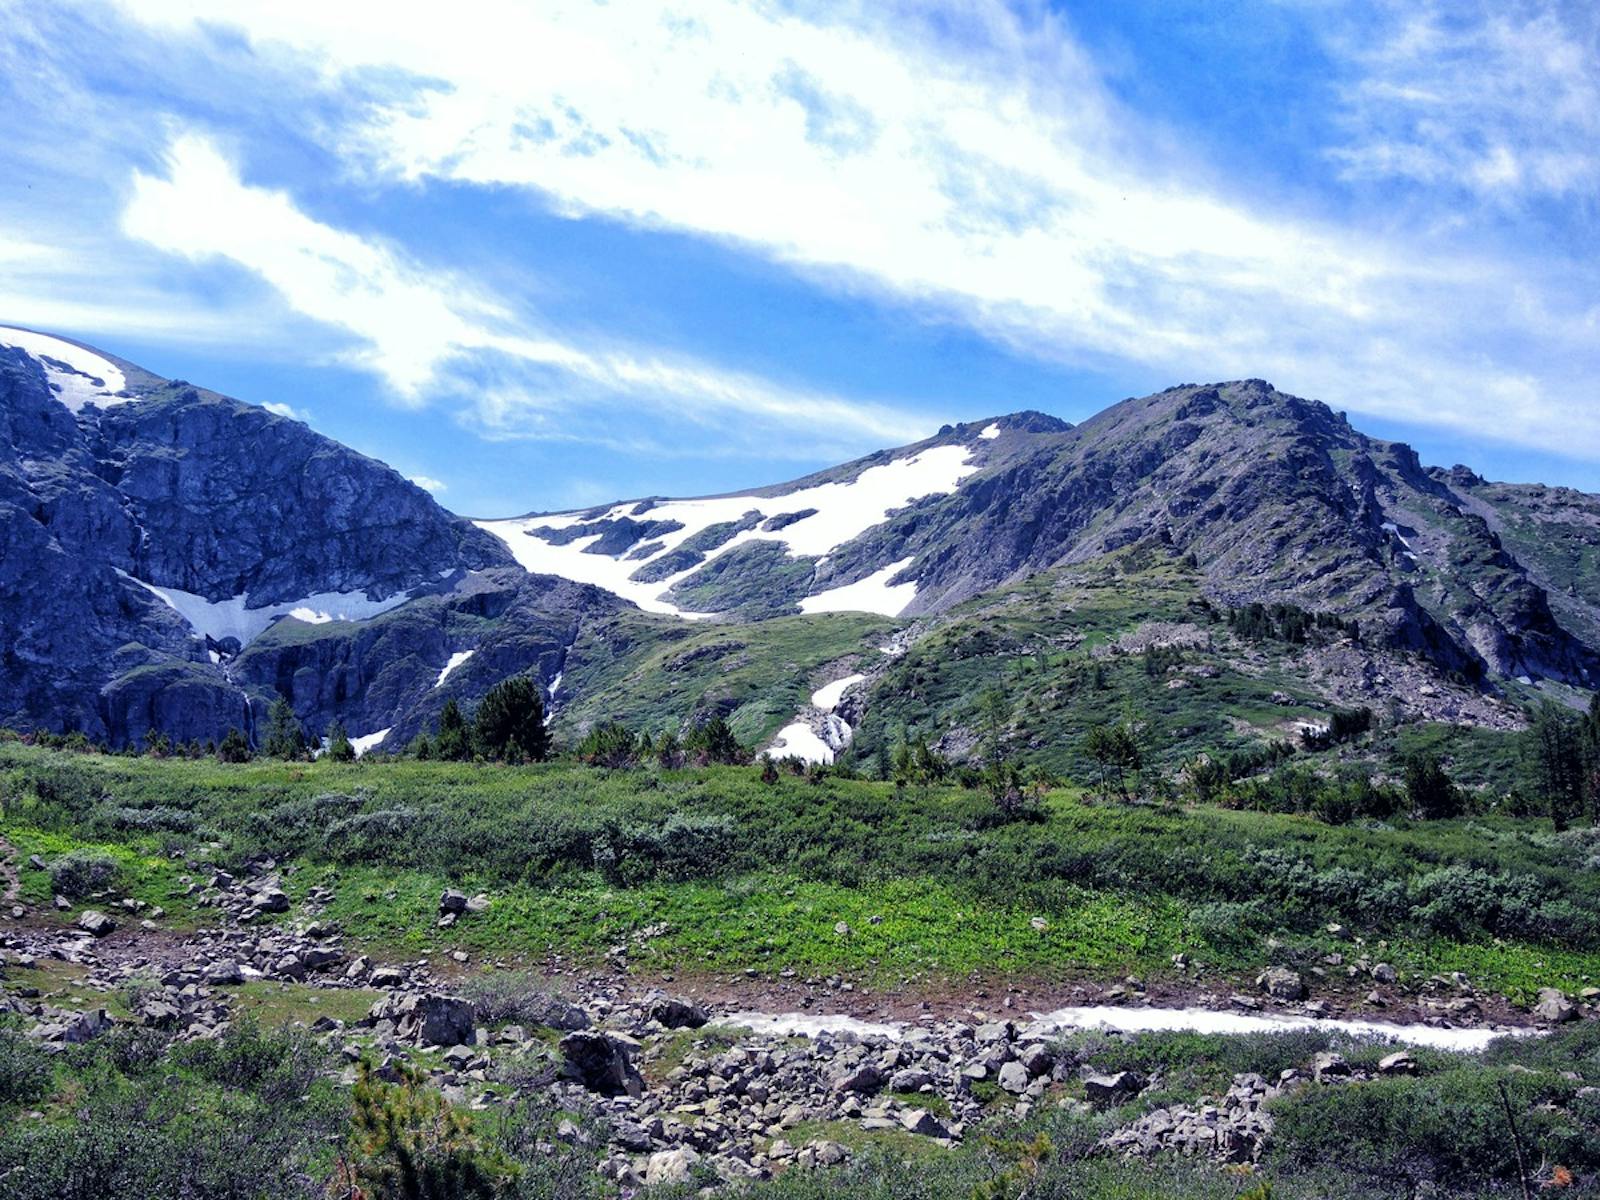 Altai Alpine Meadow and Tundra